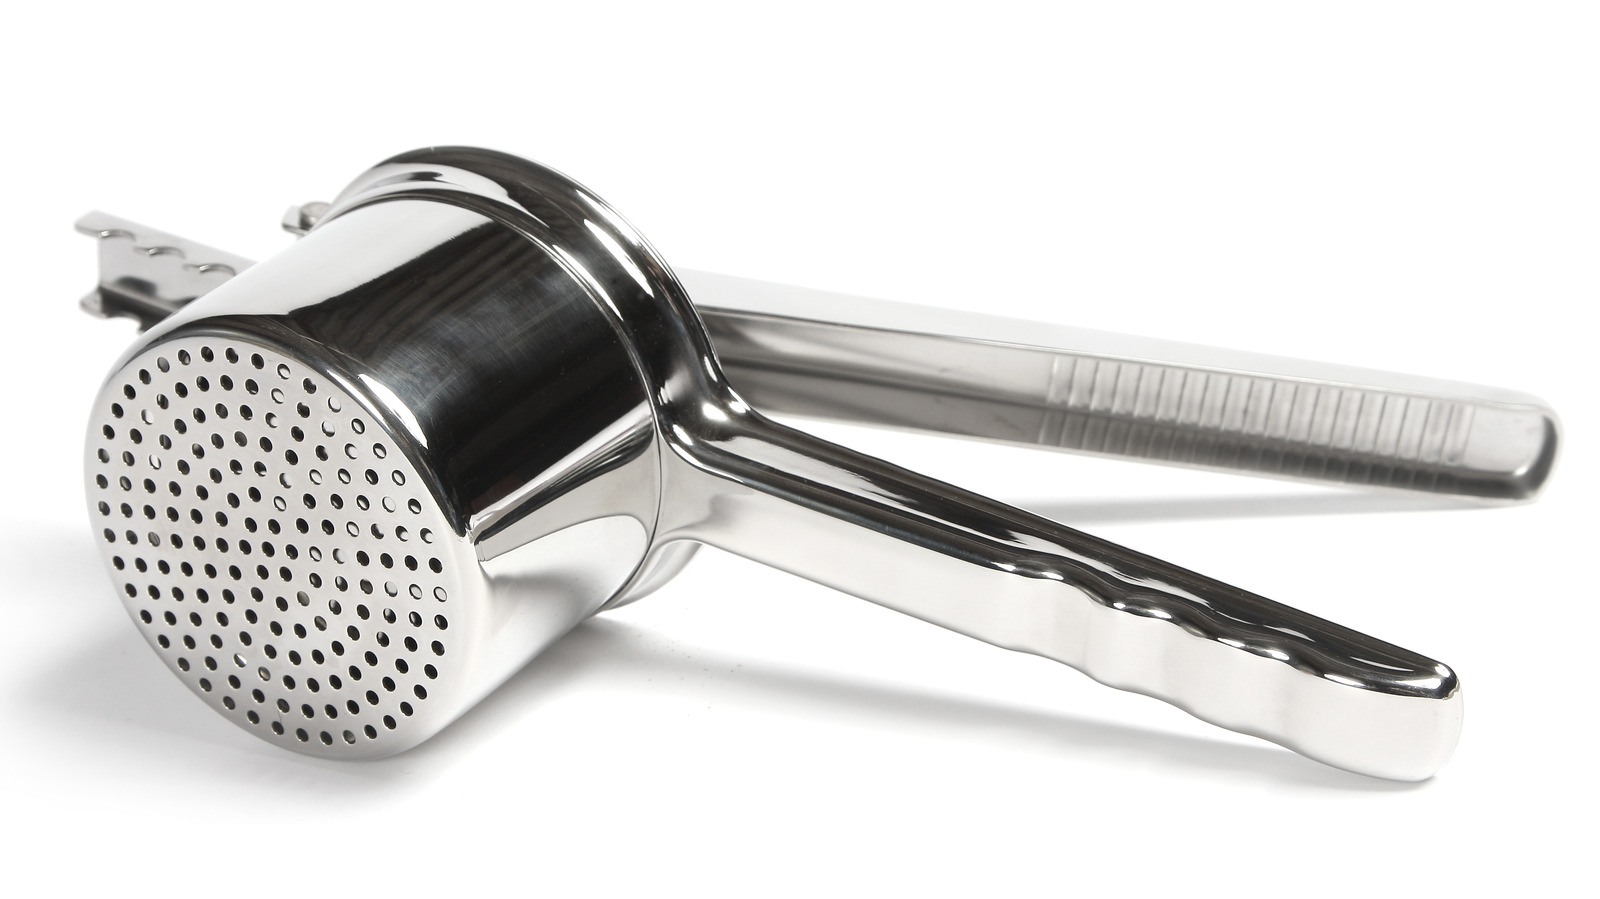 15 Kitchen Tools You Shouldn't Waste Your Money On